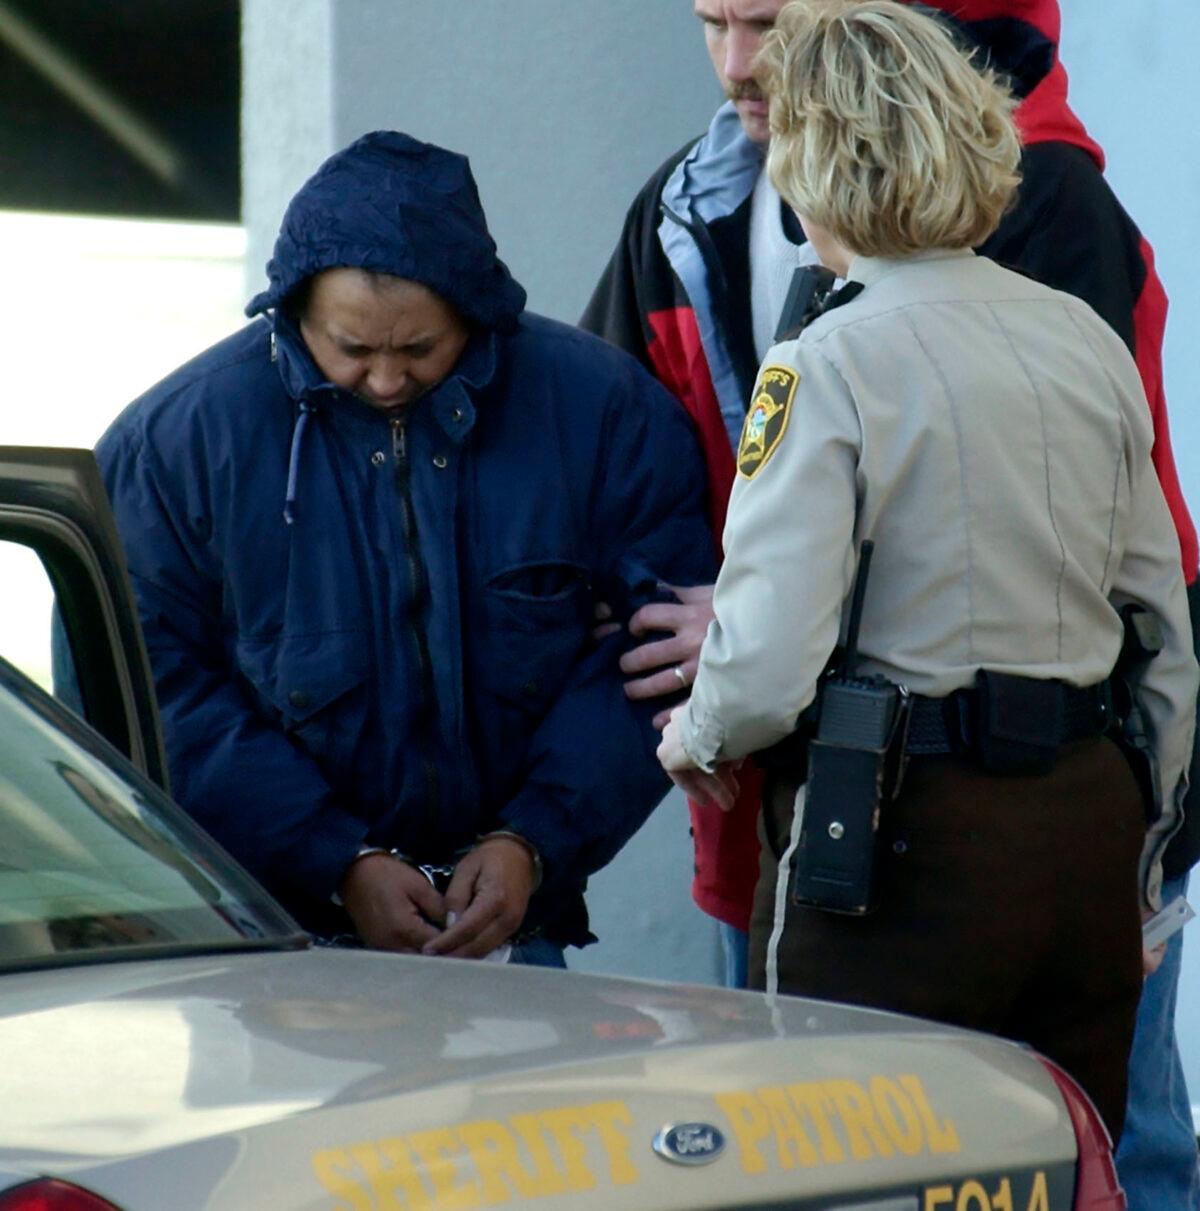 Alfonso Rodriguez Jr. (L) is helped into a sheriff's car after waiving extradition at the Polk County Courthouse in Crookston, Minn., on Dec. 3, 2003. (Ann Heisenfelt/AP Photo)